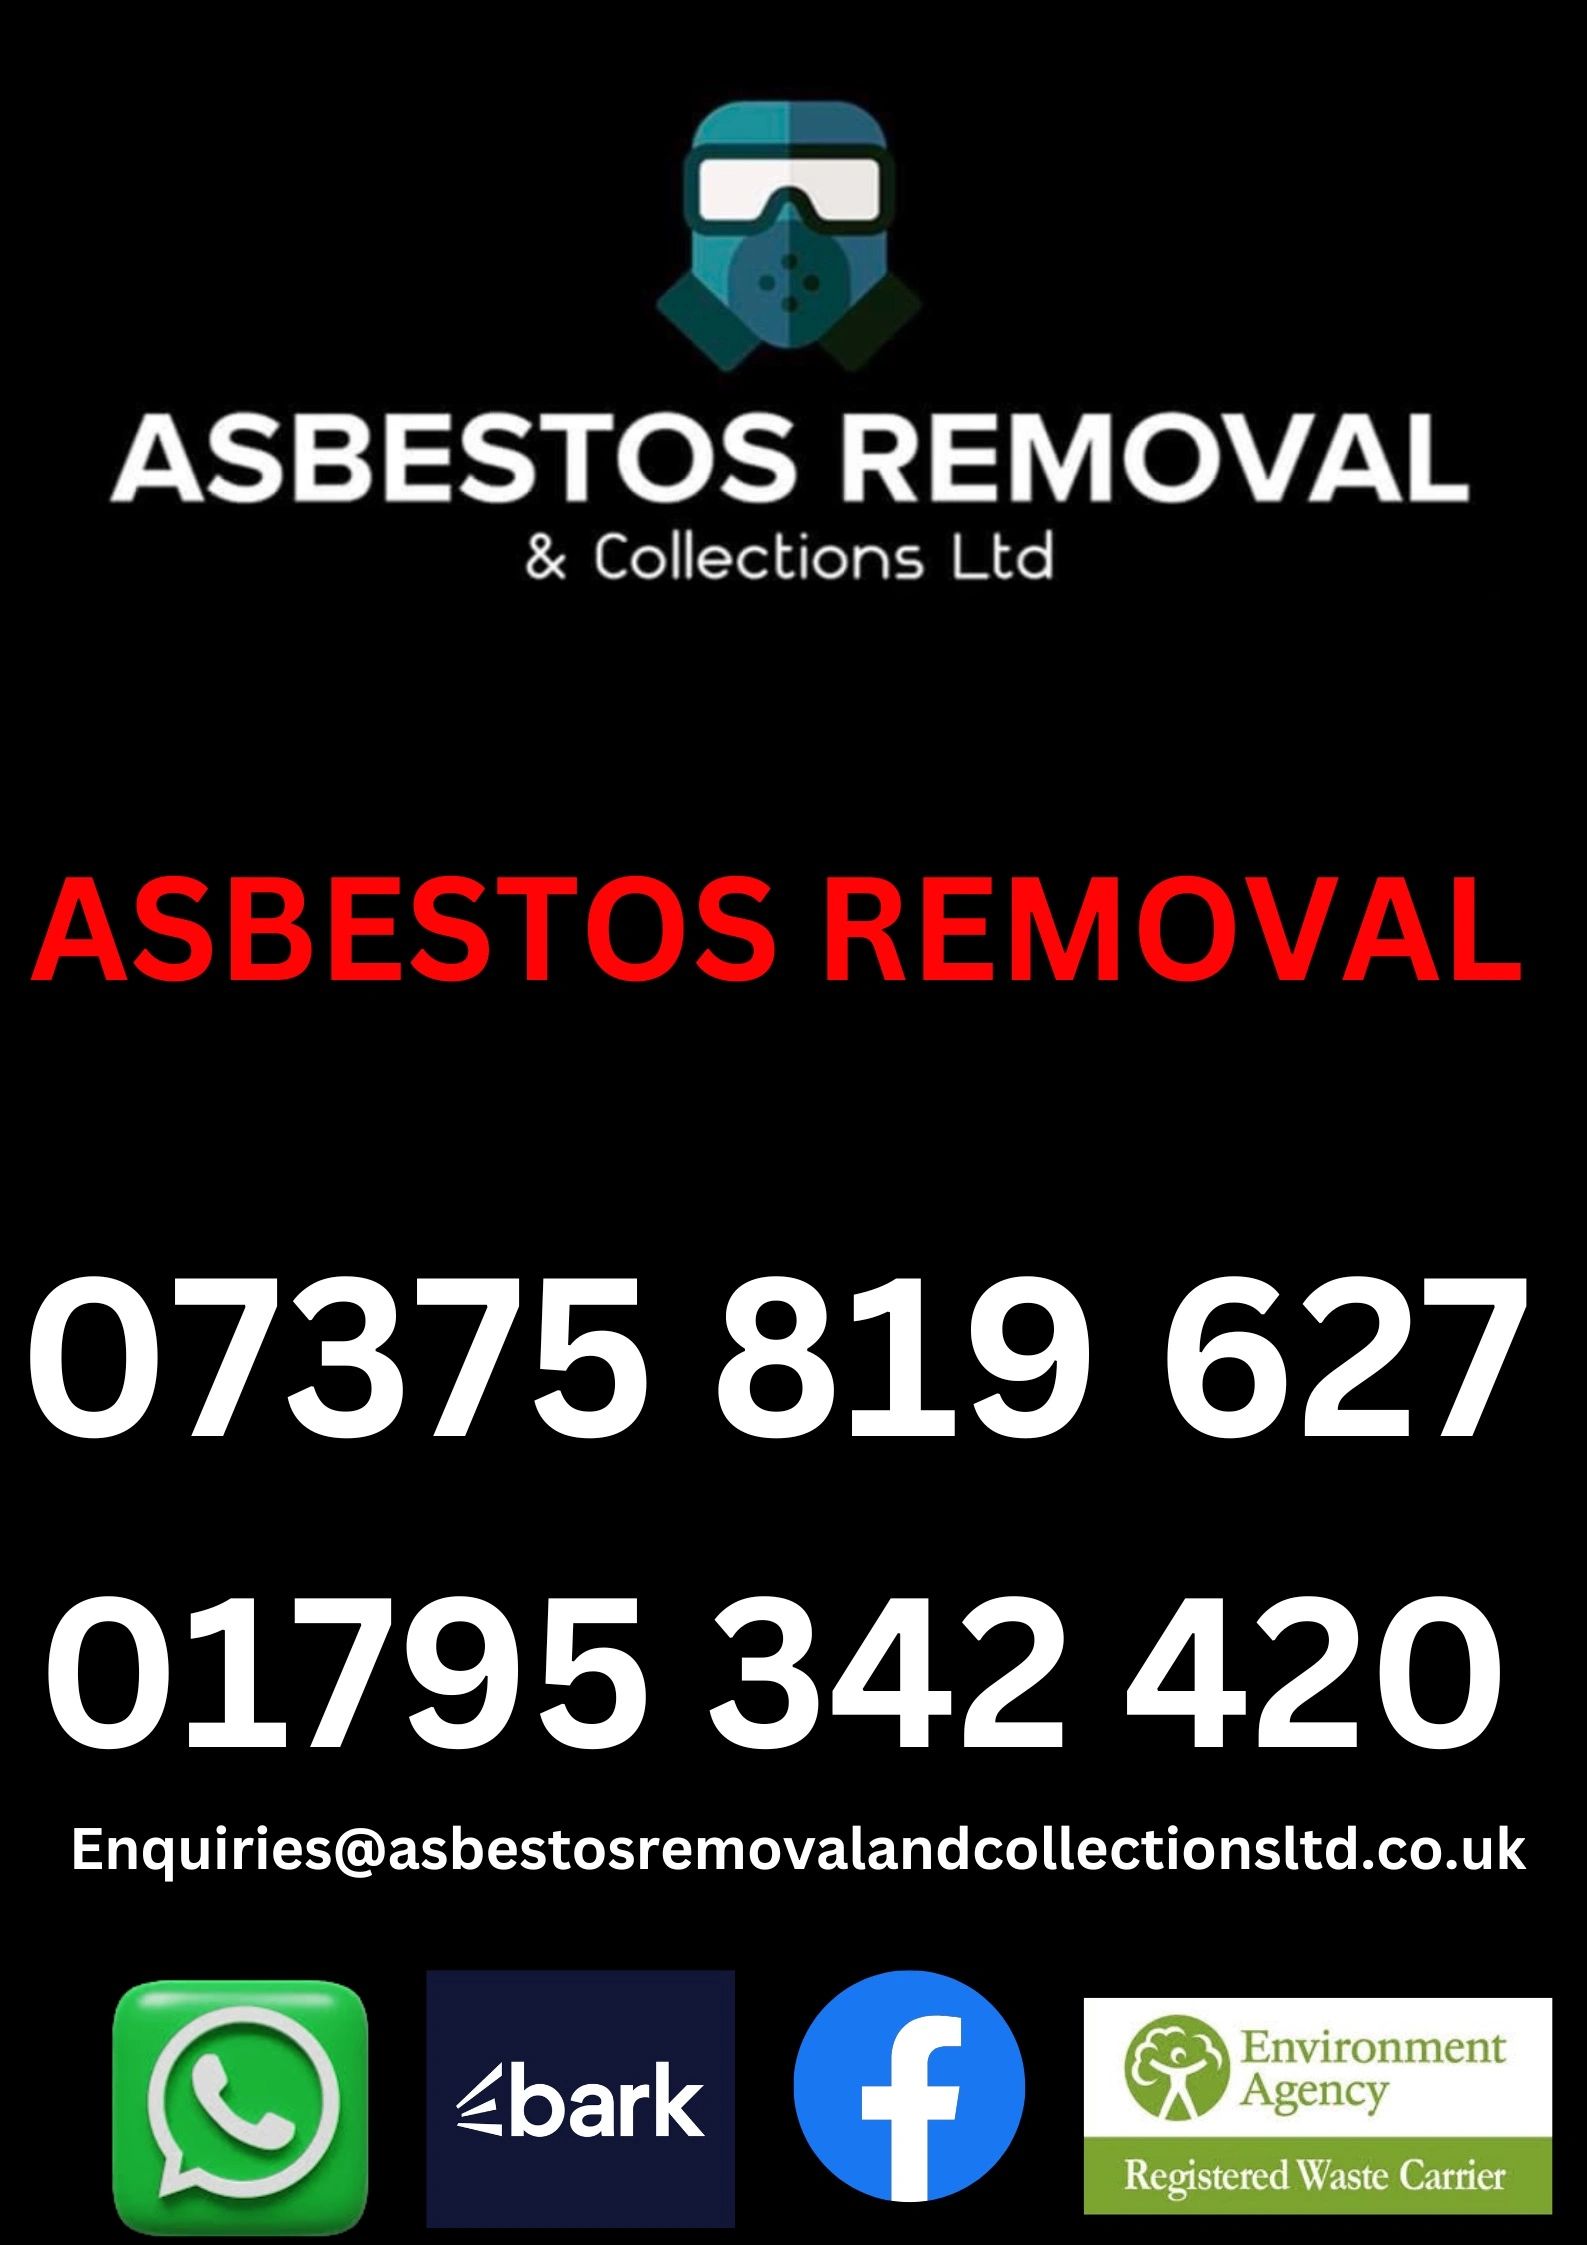 Asbestos removal services throughout the south east , Kent.